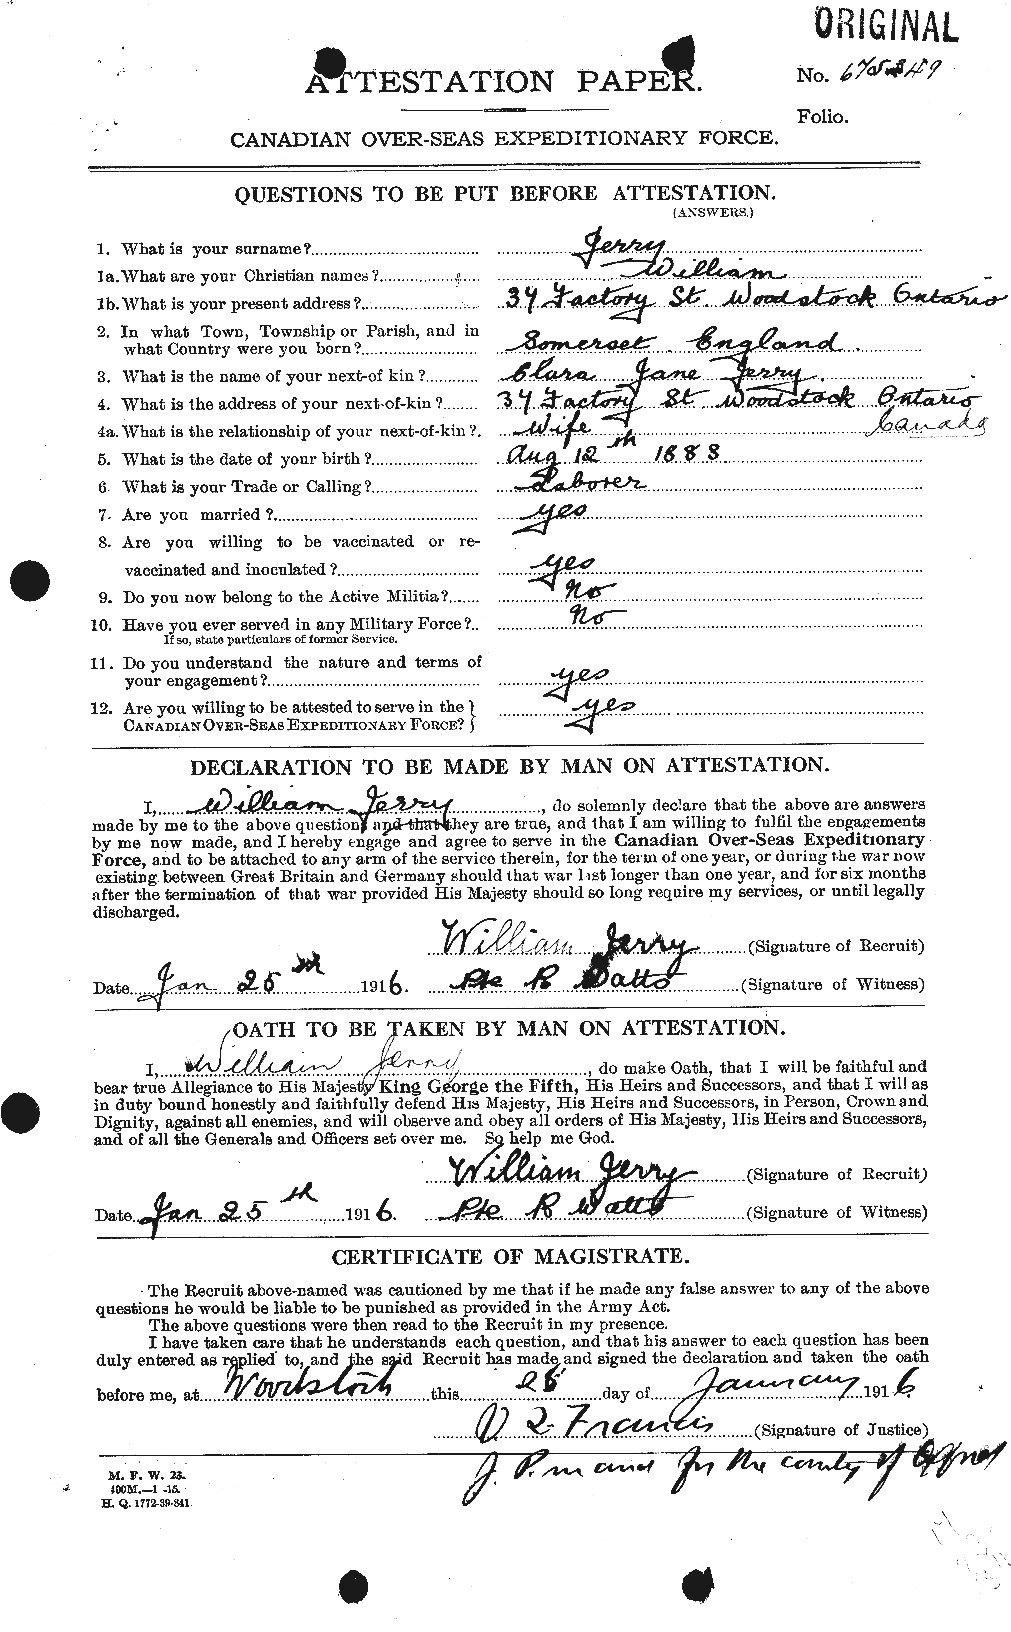 Personnel Records of the First World War - CEF 421807a